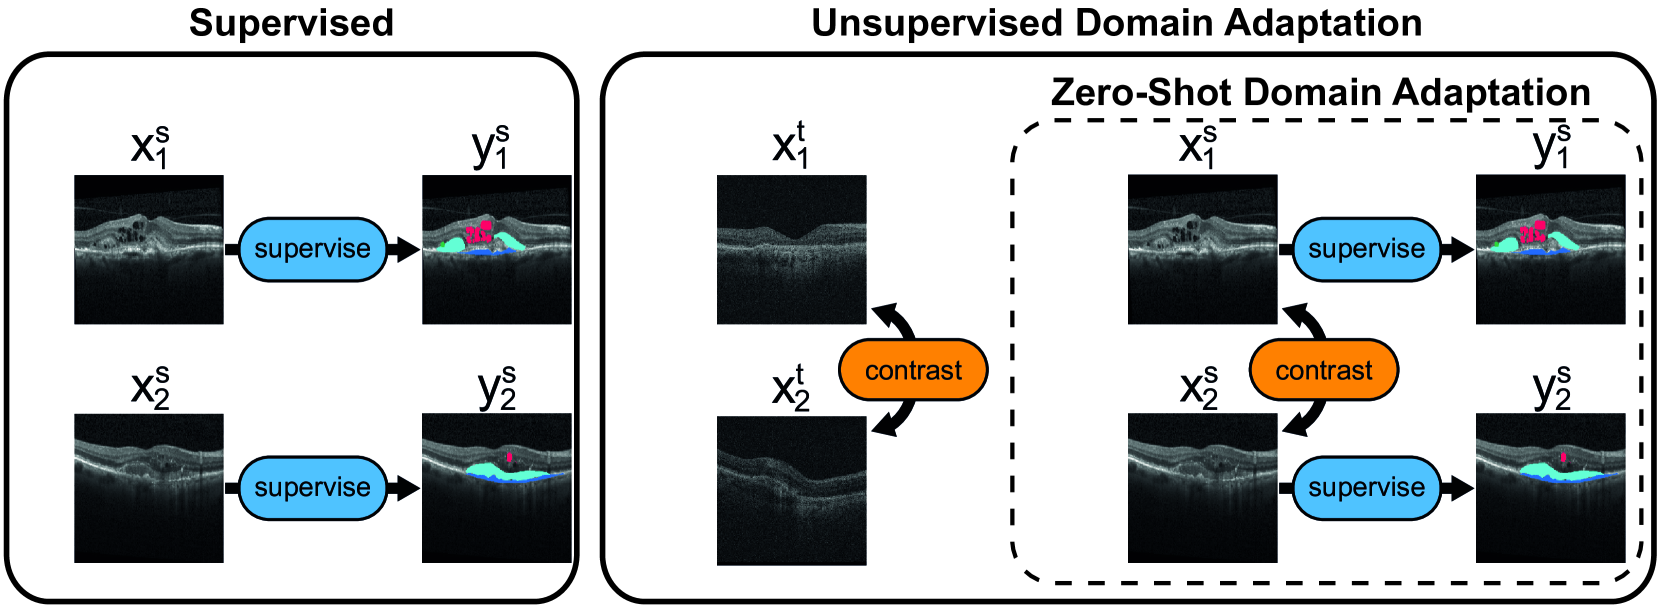 Joint semi-supervised and contrastive learning enables zero-shot domain-adaptation and multi-domain segmentation